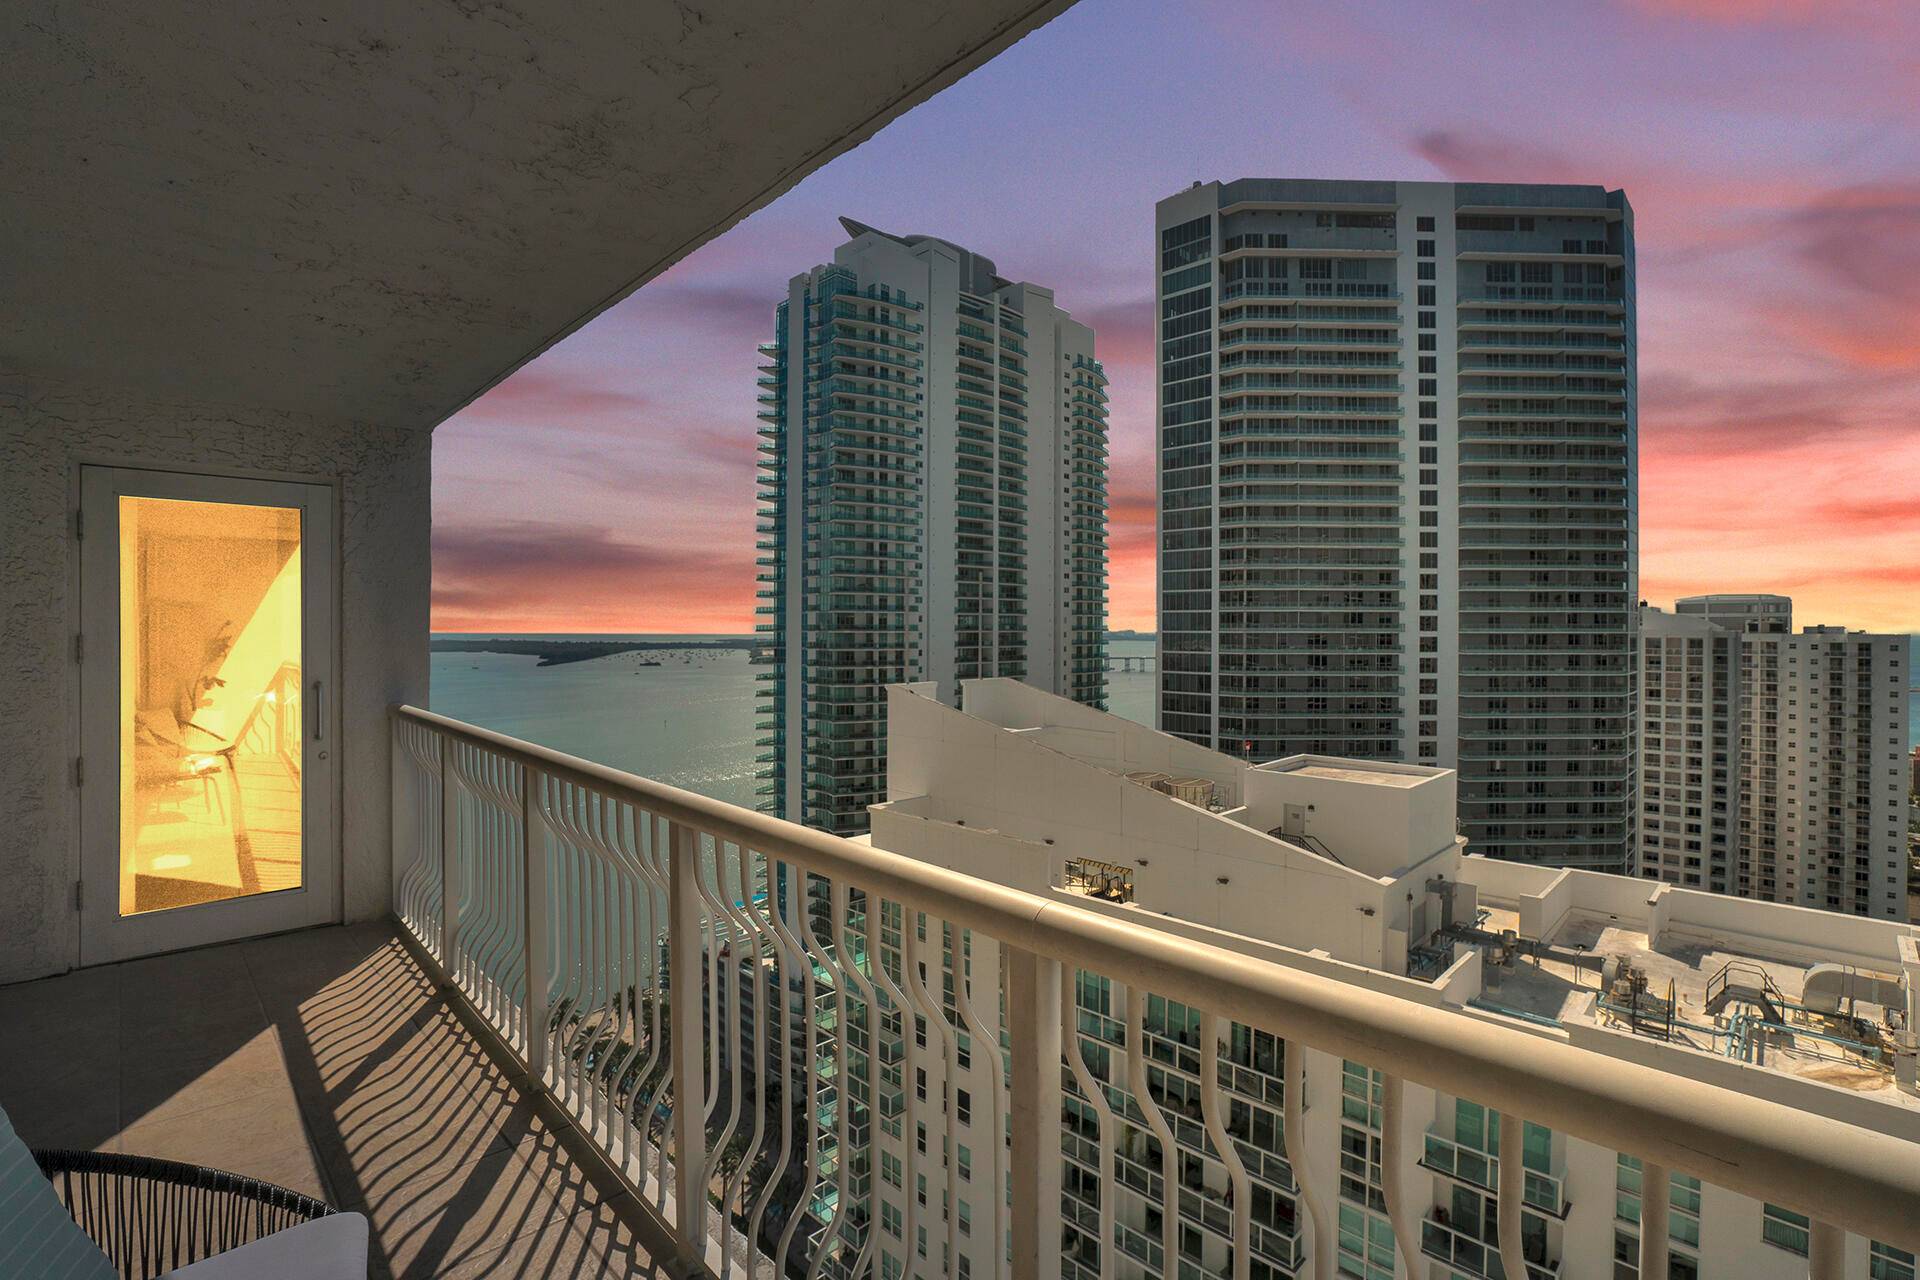 Welcome to Brickell ! Nestled along the bay this exquisite 2 bedroom, 2 bath condo offers a blend of luxurious living with breathtaking water city views.